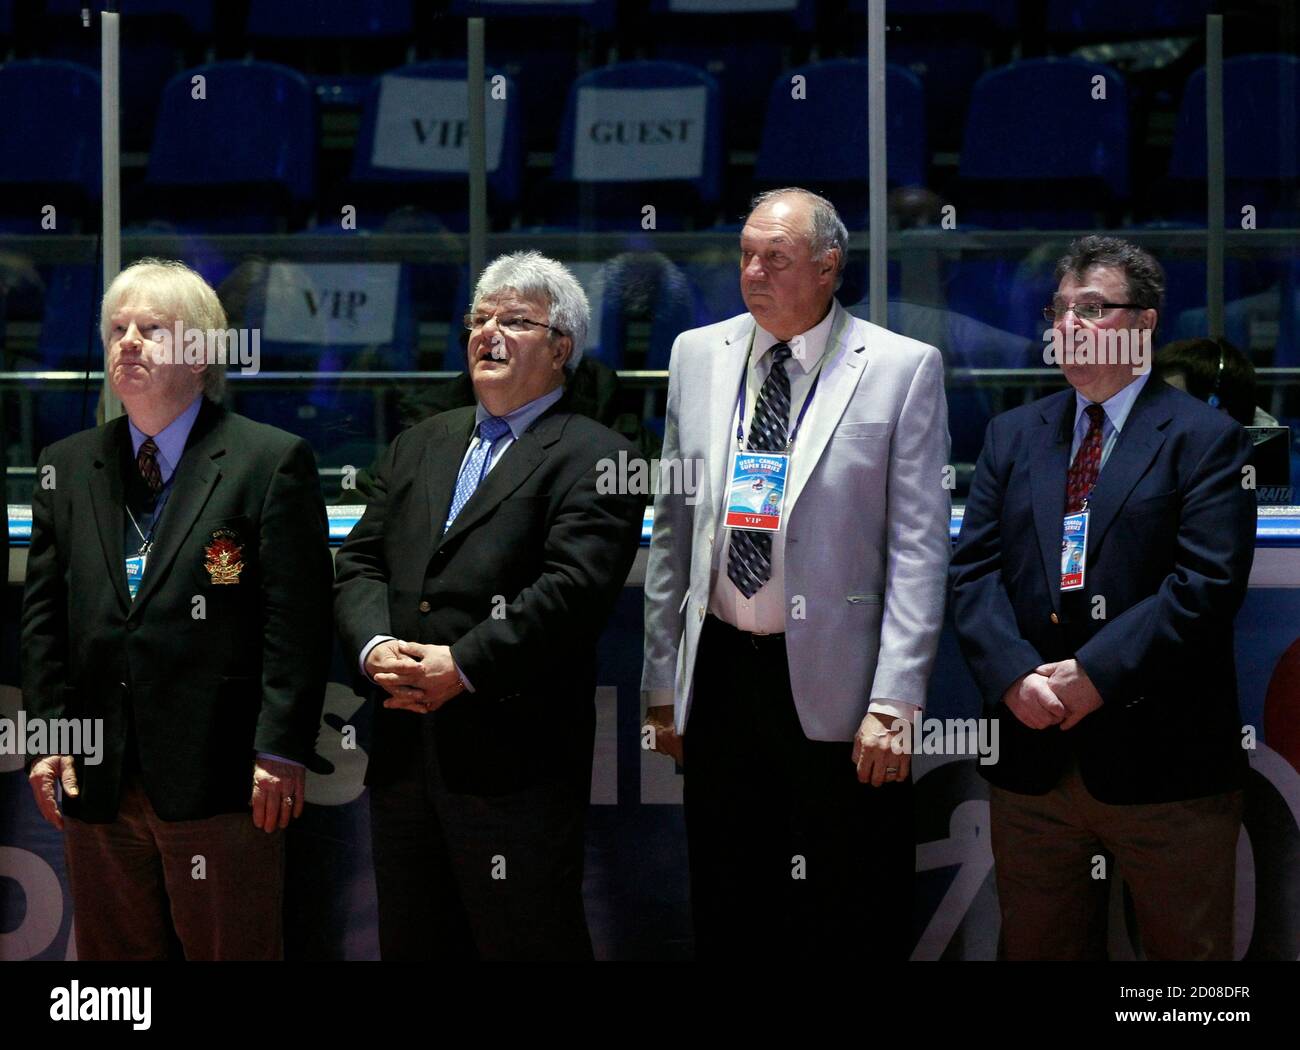 Canadian former professional ice hockey players (L-R) Pat Stapleton, Marsel Dionne, Jocelyn Guevremont and Jean-Paul Parise stand on ice during the starting ceremony for an exhibition ice hockey match to mark the anniversary of USSR-Canada 1972 summit series in Moscow February 25, 2012. REUTERS/Grigory Dukor (RUSSIA - Tags: ANNIVERSARY SPORT ICE HOCKEY) Stock Photo